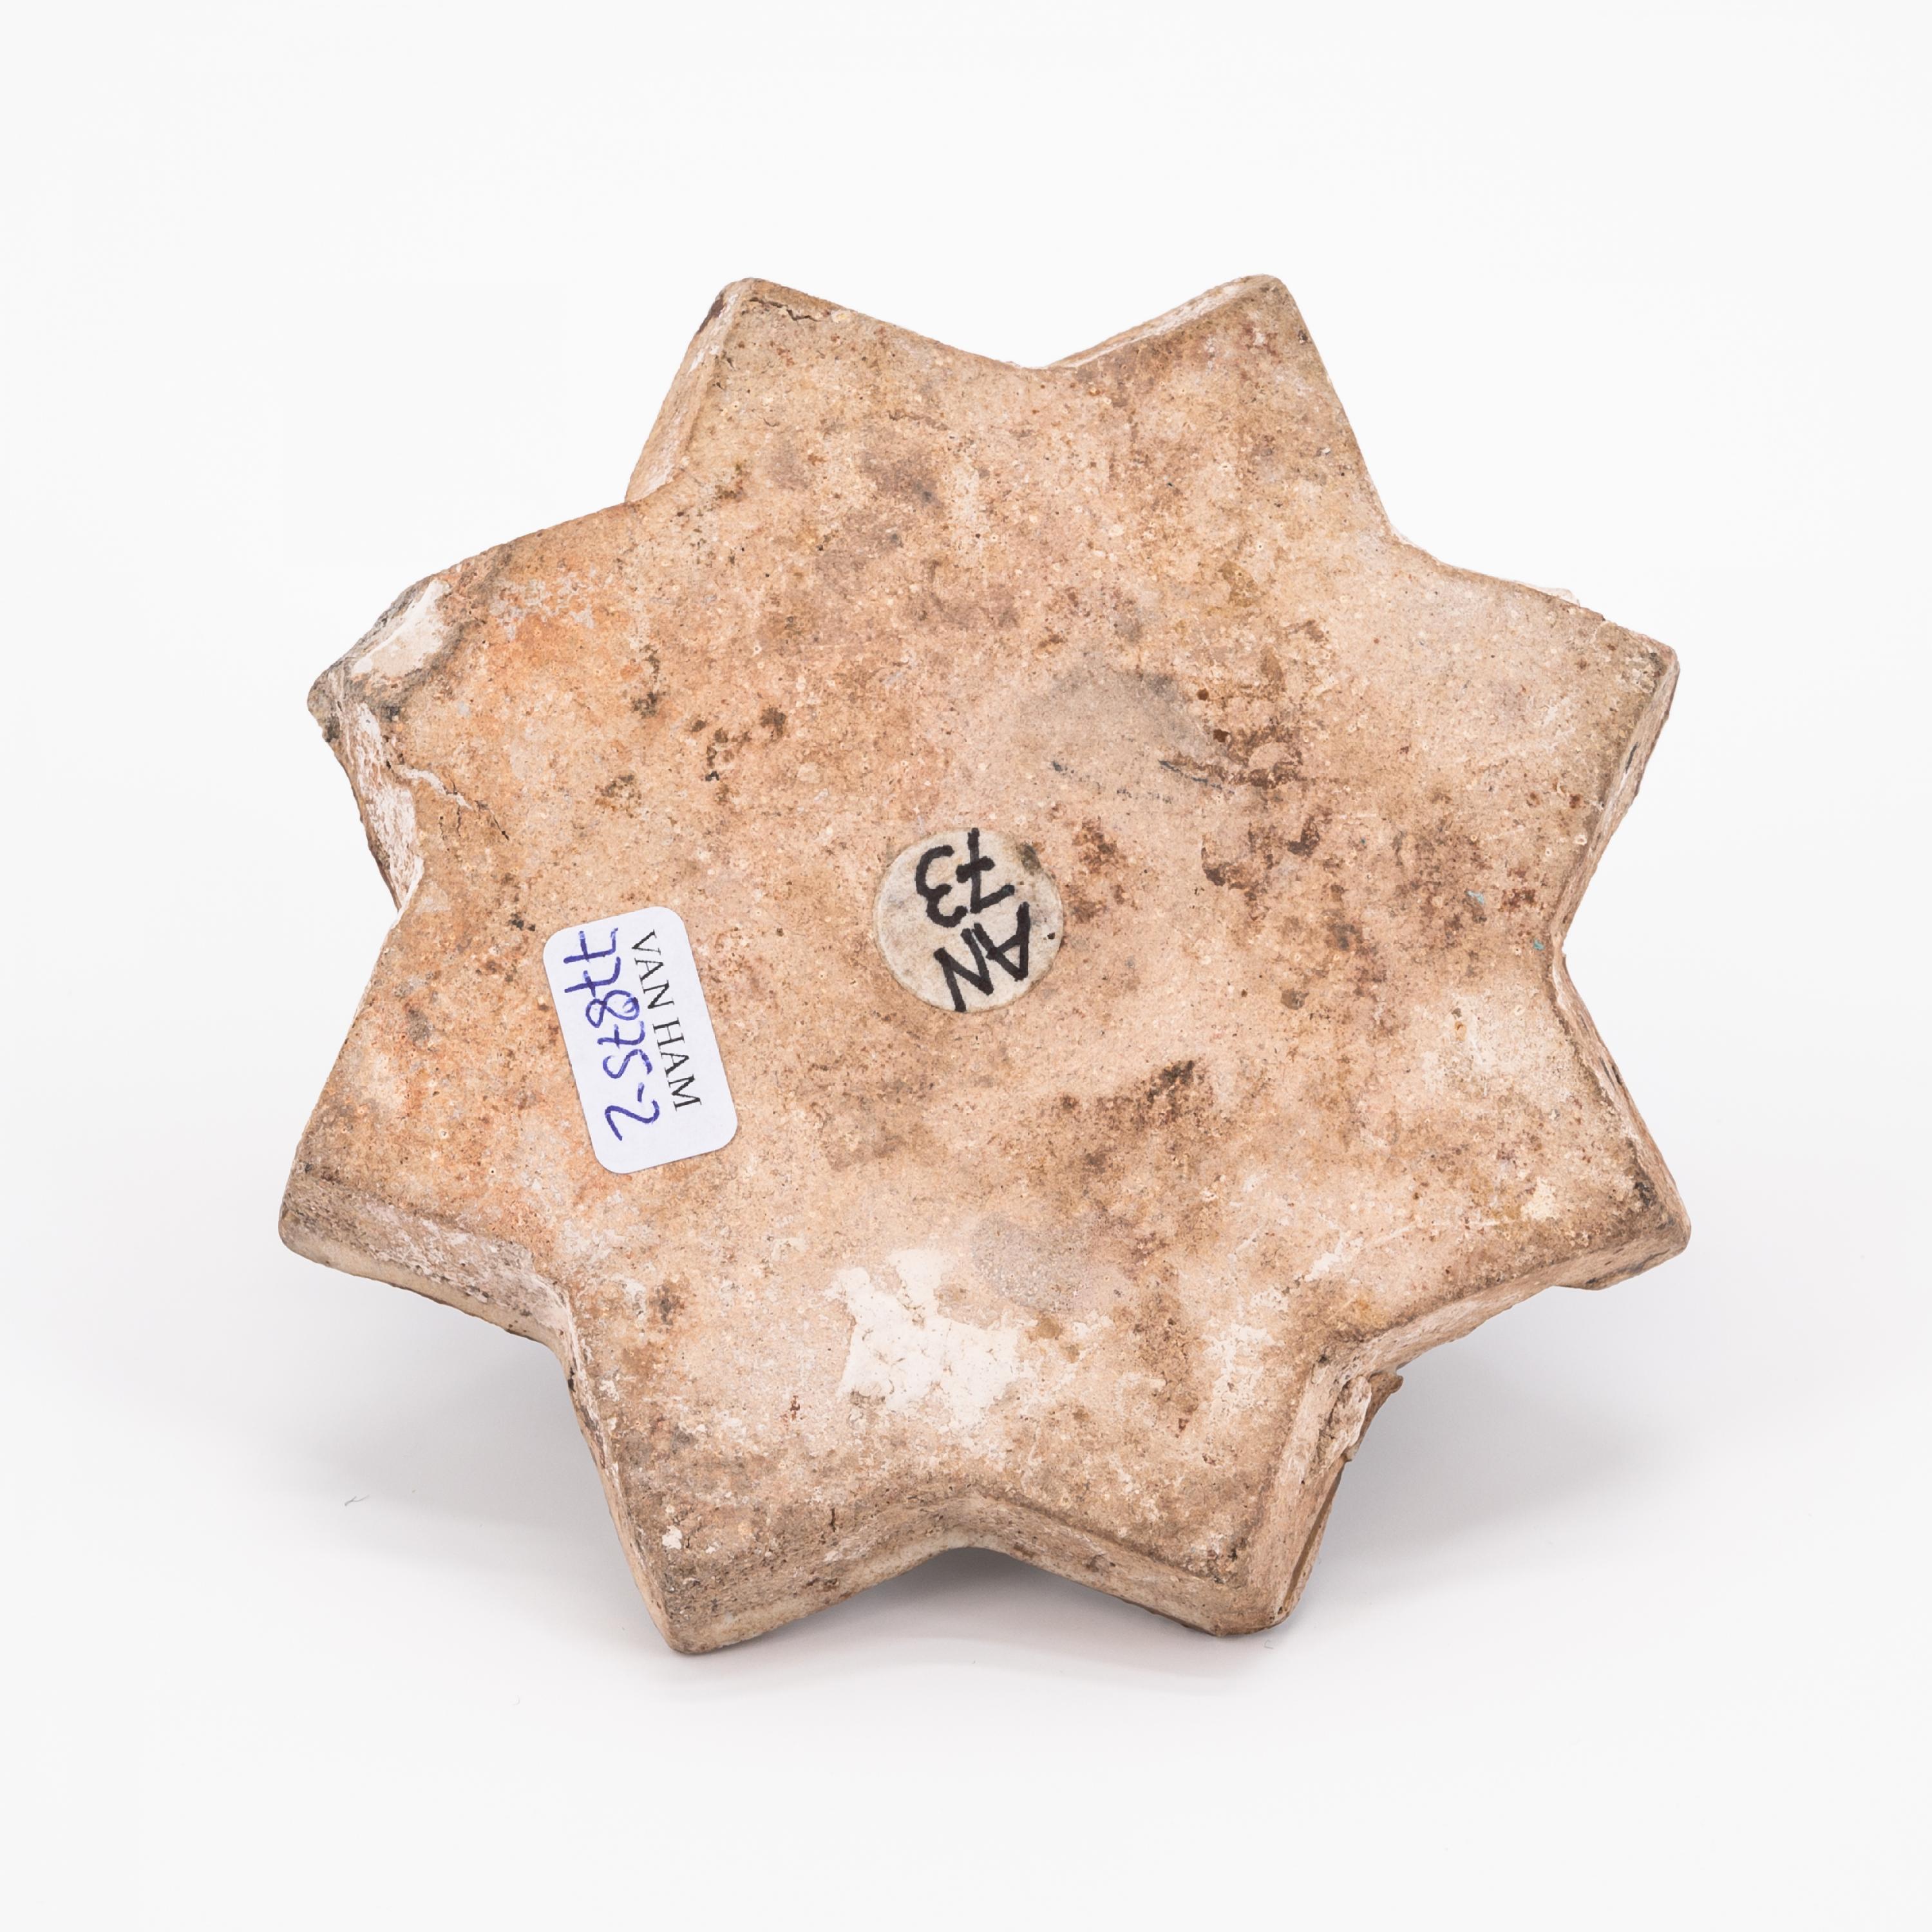 SMALL CERAMIC STAR TILE WITH WILD BOAR - Image 3 of 3